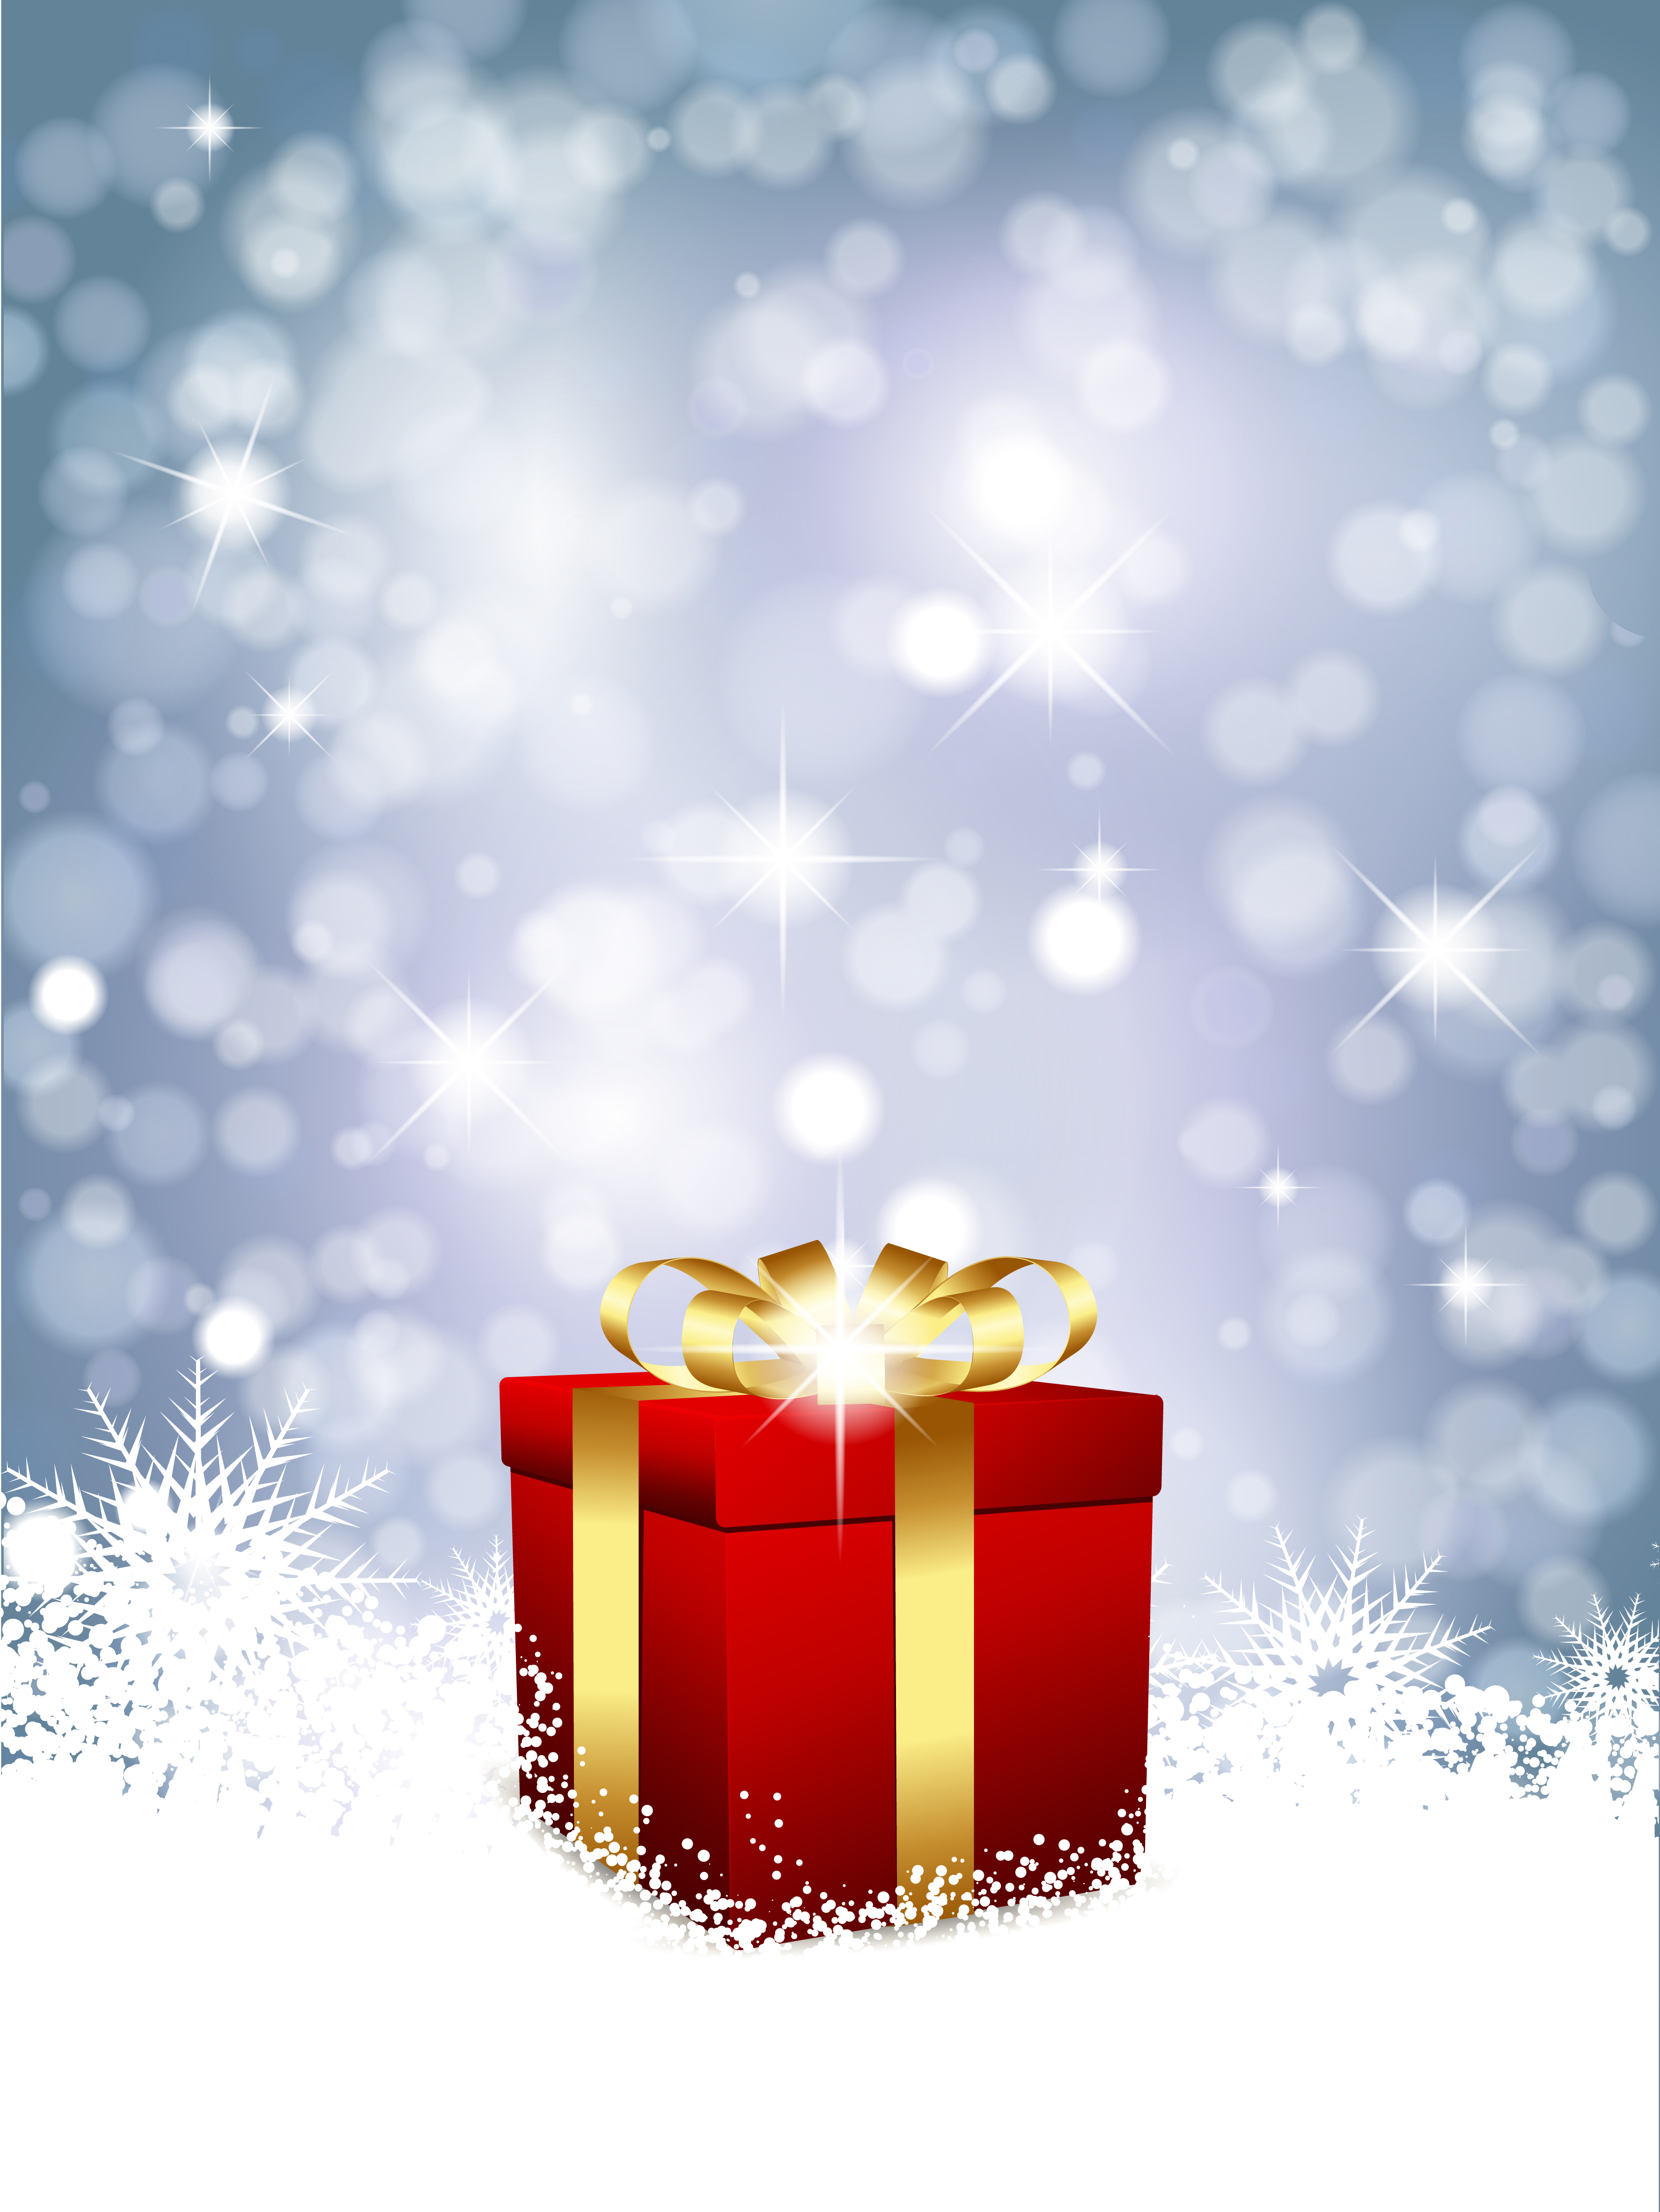 Christmas gift background 236846 - Download Free Vectors, Clipart